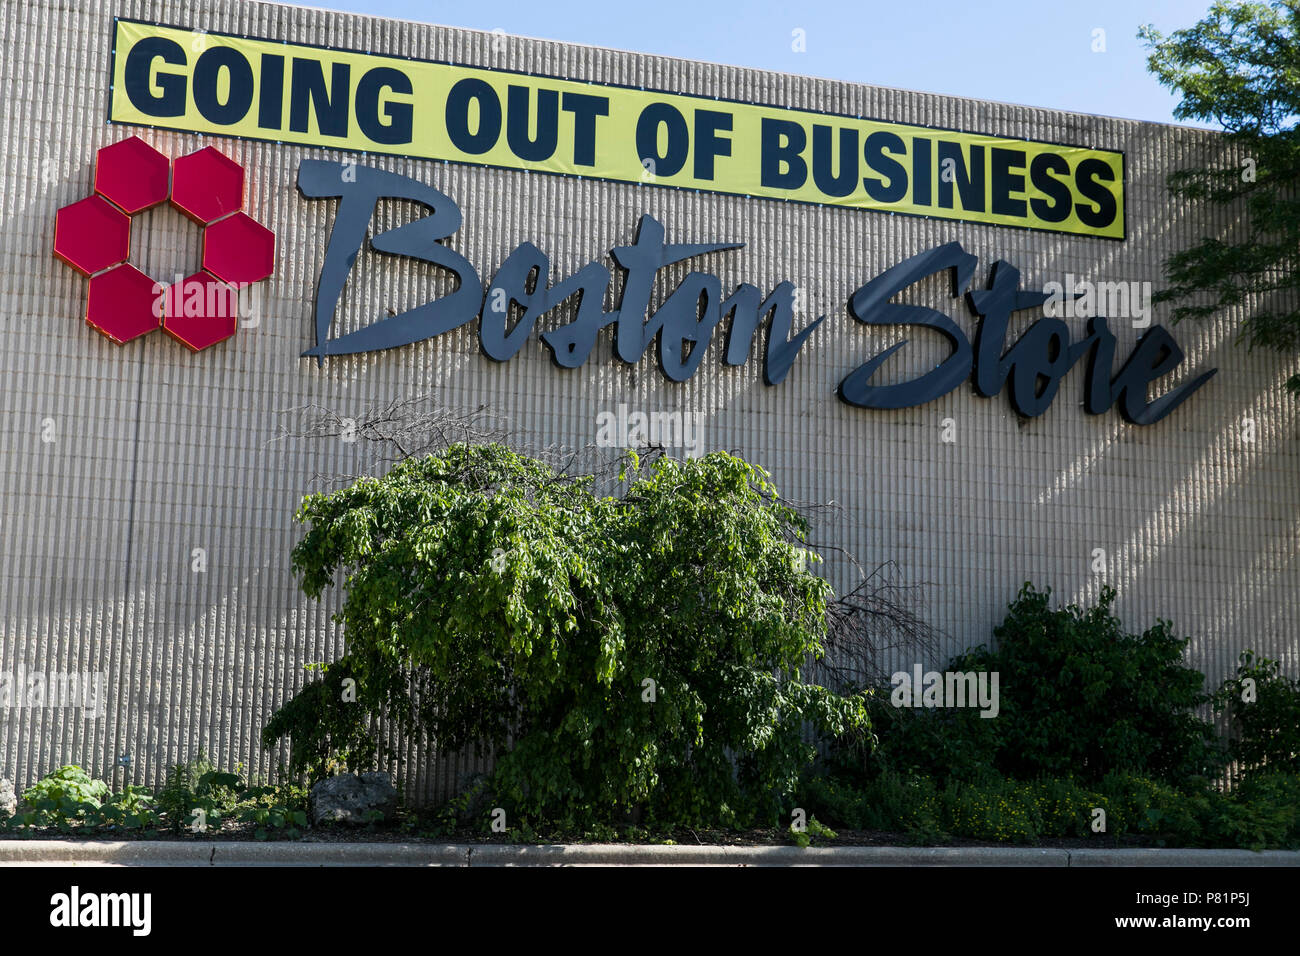 A 'Going Out Of Business' sign outside of a Boston Store retail store in Racine, Wisconsin on June 23, 2018. Stock Photo